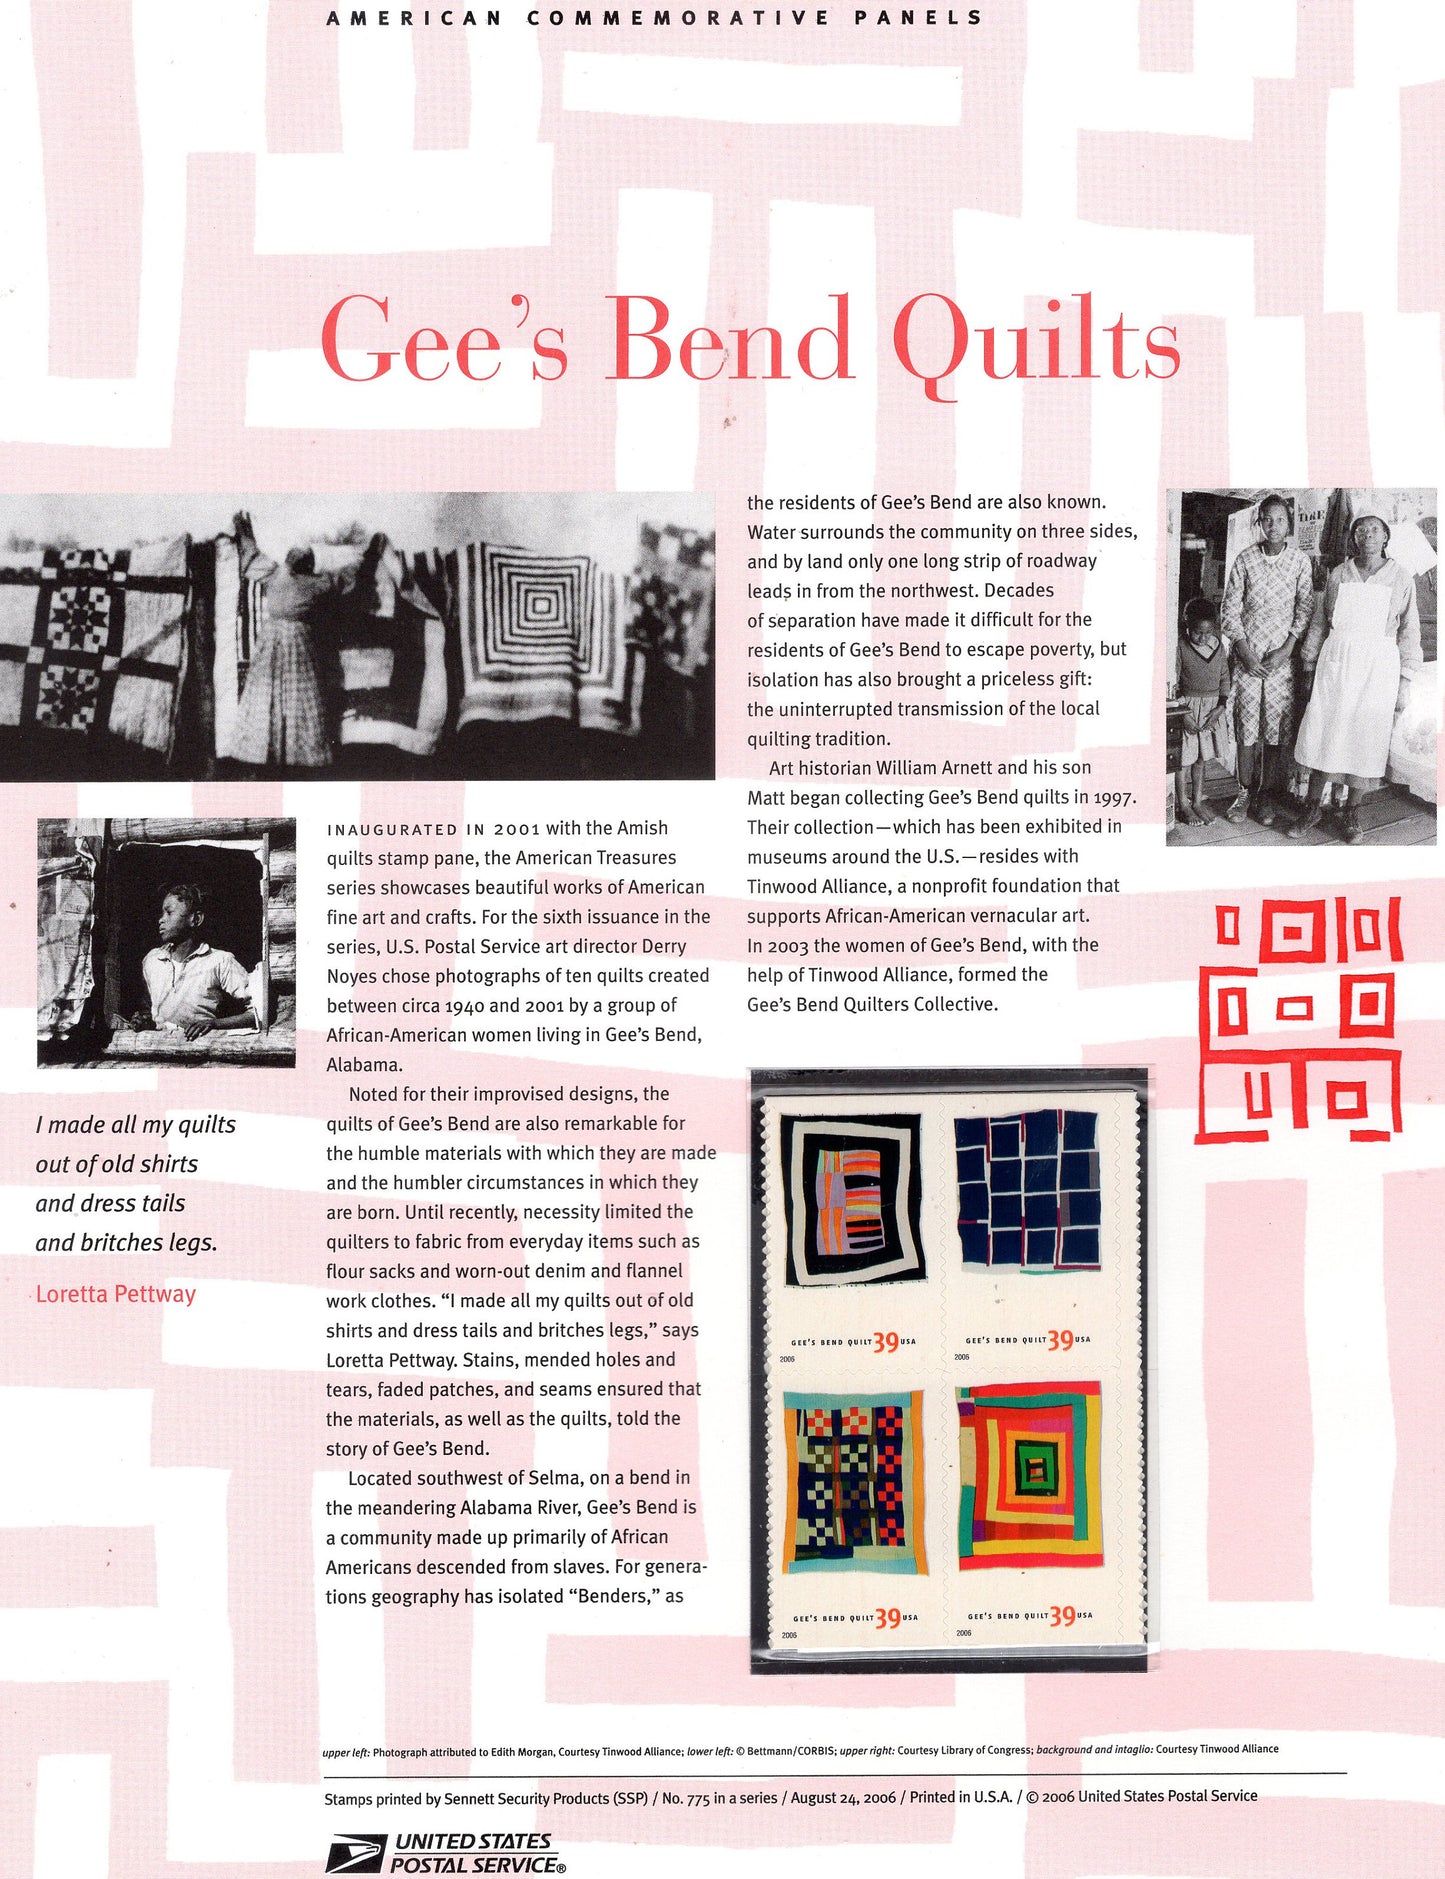 GEE'S BEND QUILTS Black American Treasure Crafts Commemorative Panel Stamps + Illustrations plus Text – A Great Gift 8.5x11- Issued in 2006-